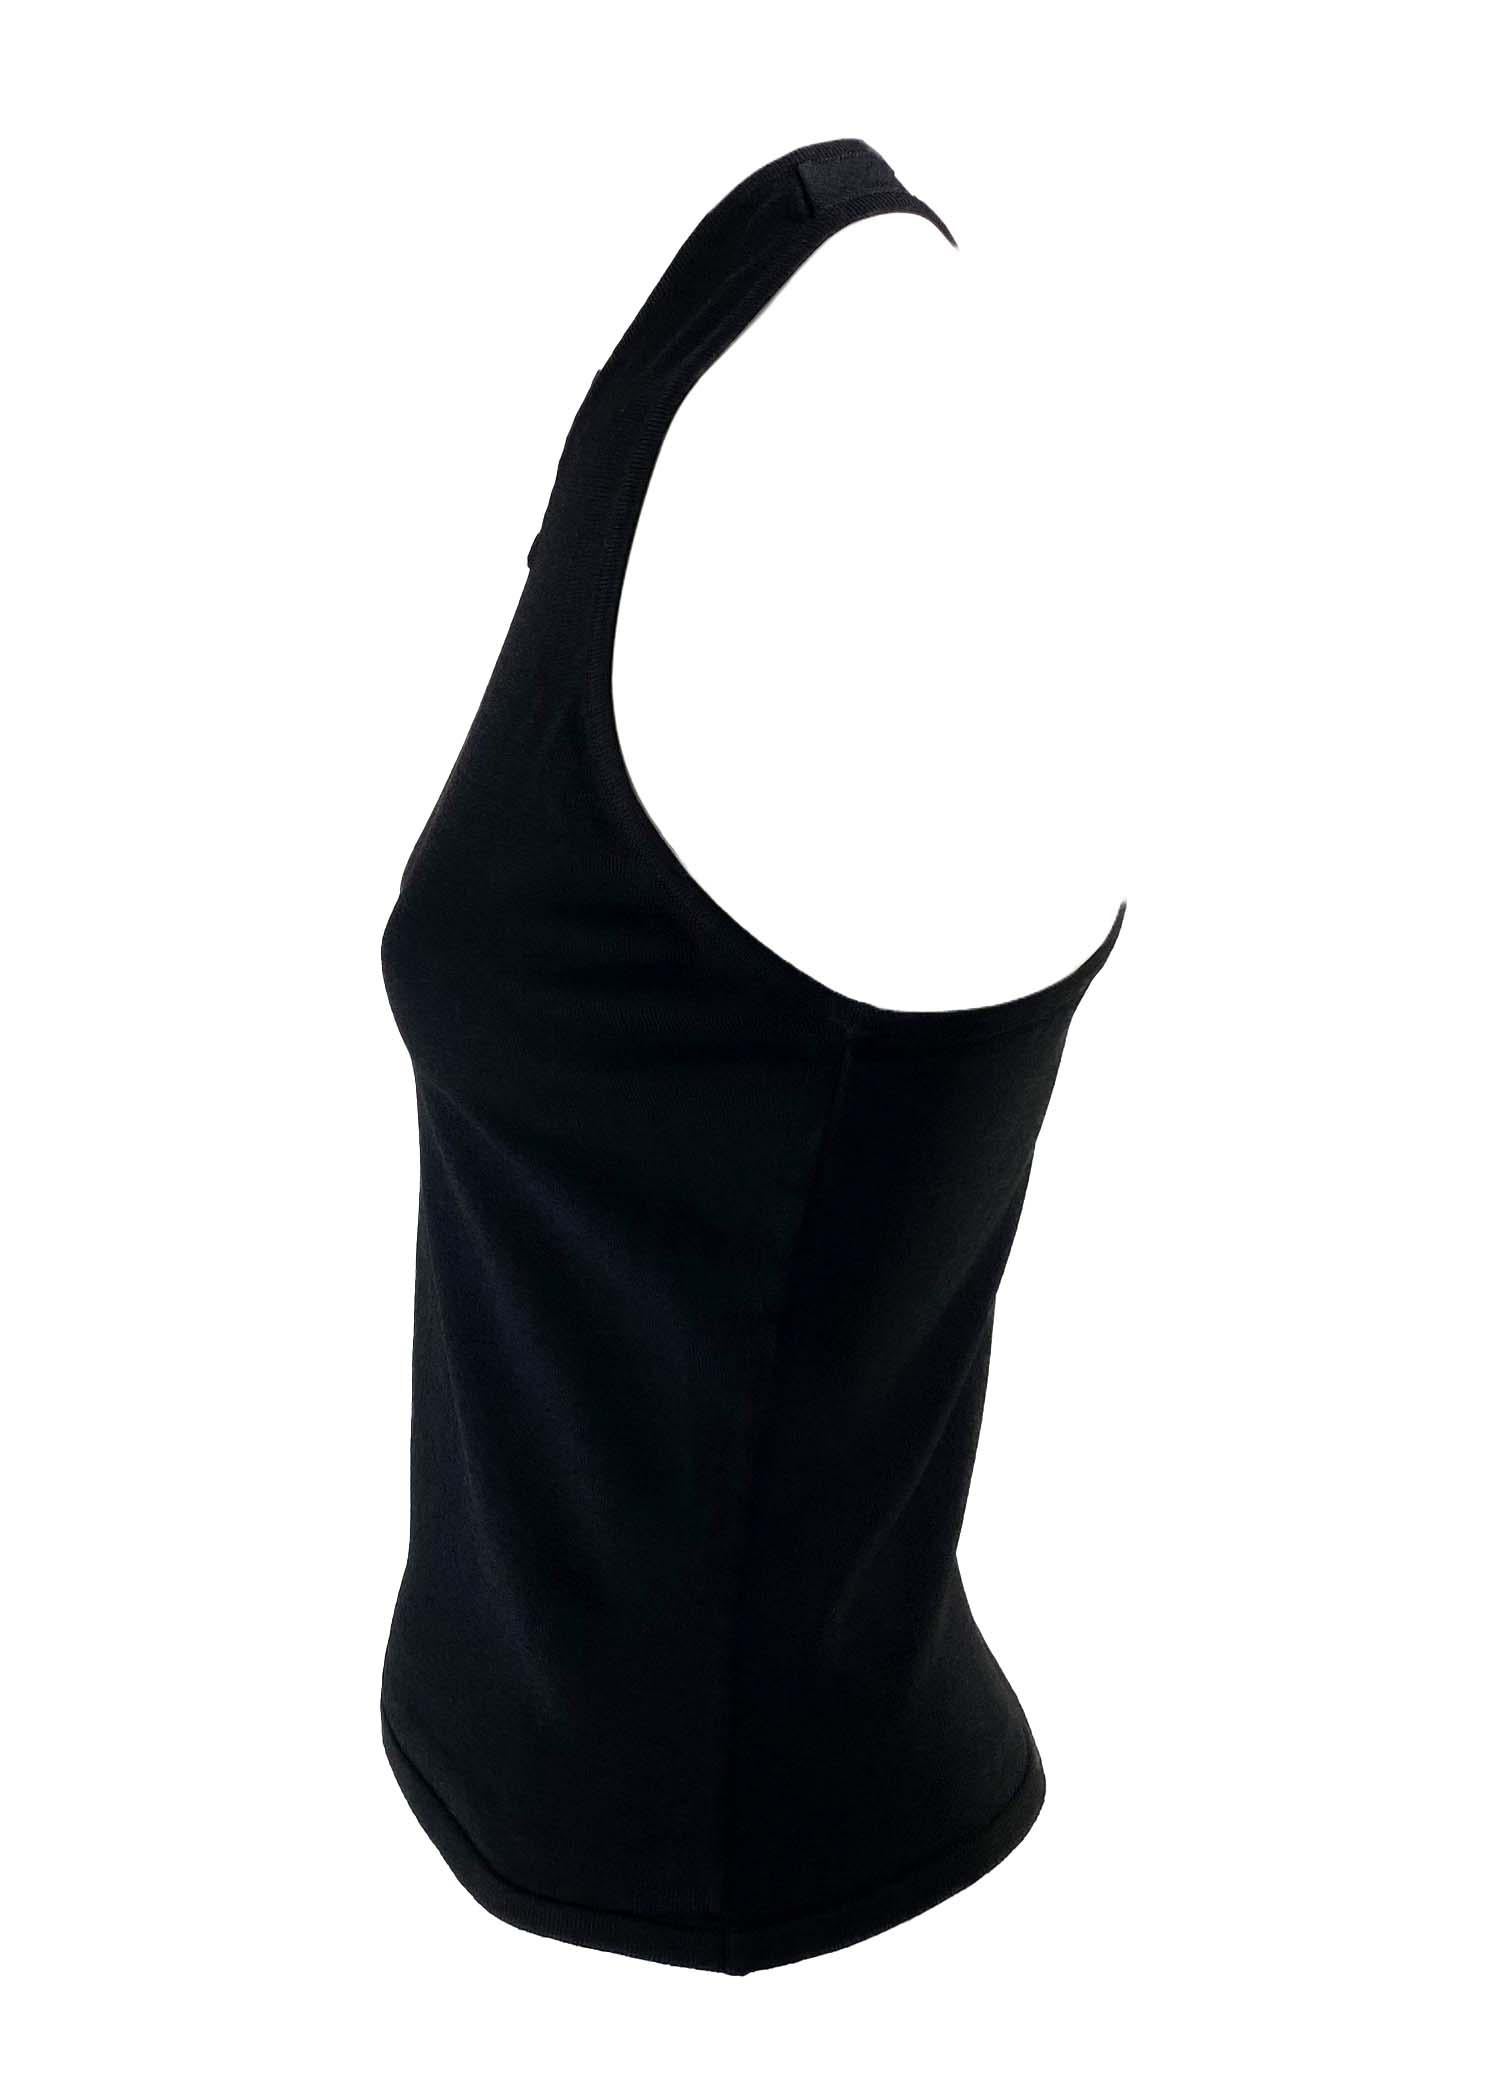 TheRealList presents: a sleek Tom Ford designed take on a Gucci razor back tank top. The fitted tank top  features a high v-neck in the front and a tight razorback. This top was created by Tom Ford for the Spring/Summer 1998 collection and is the